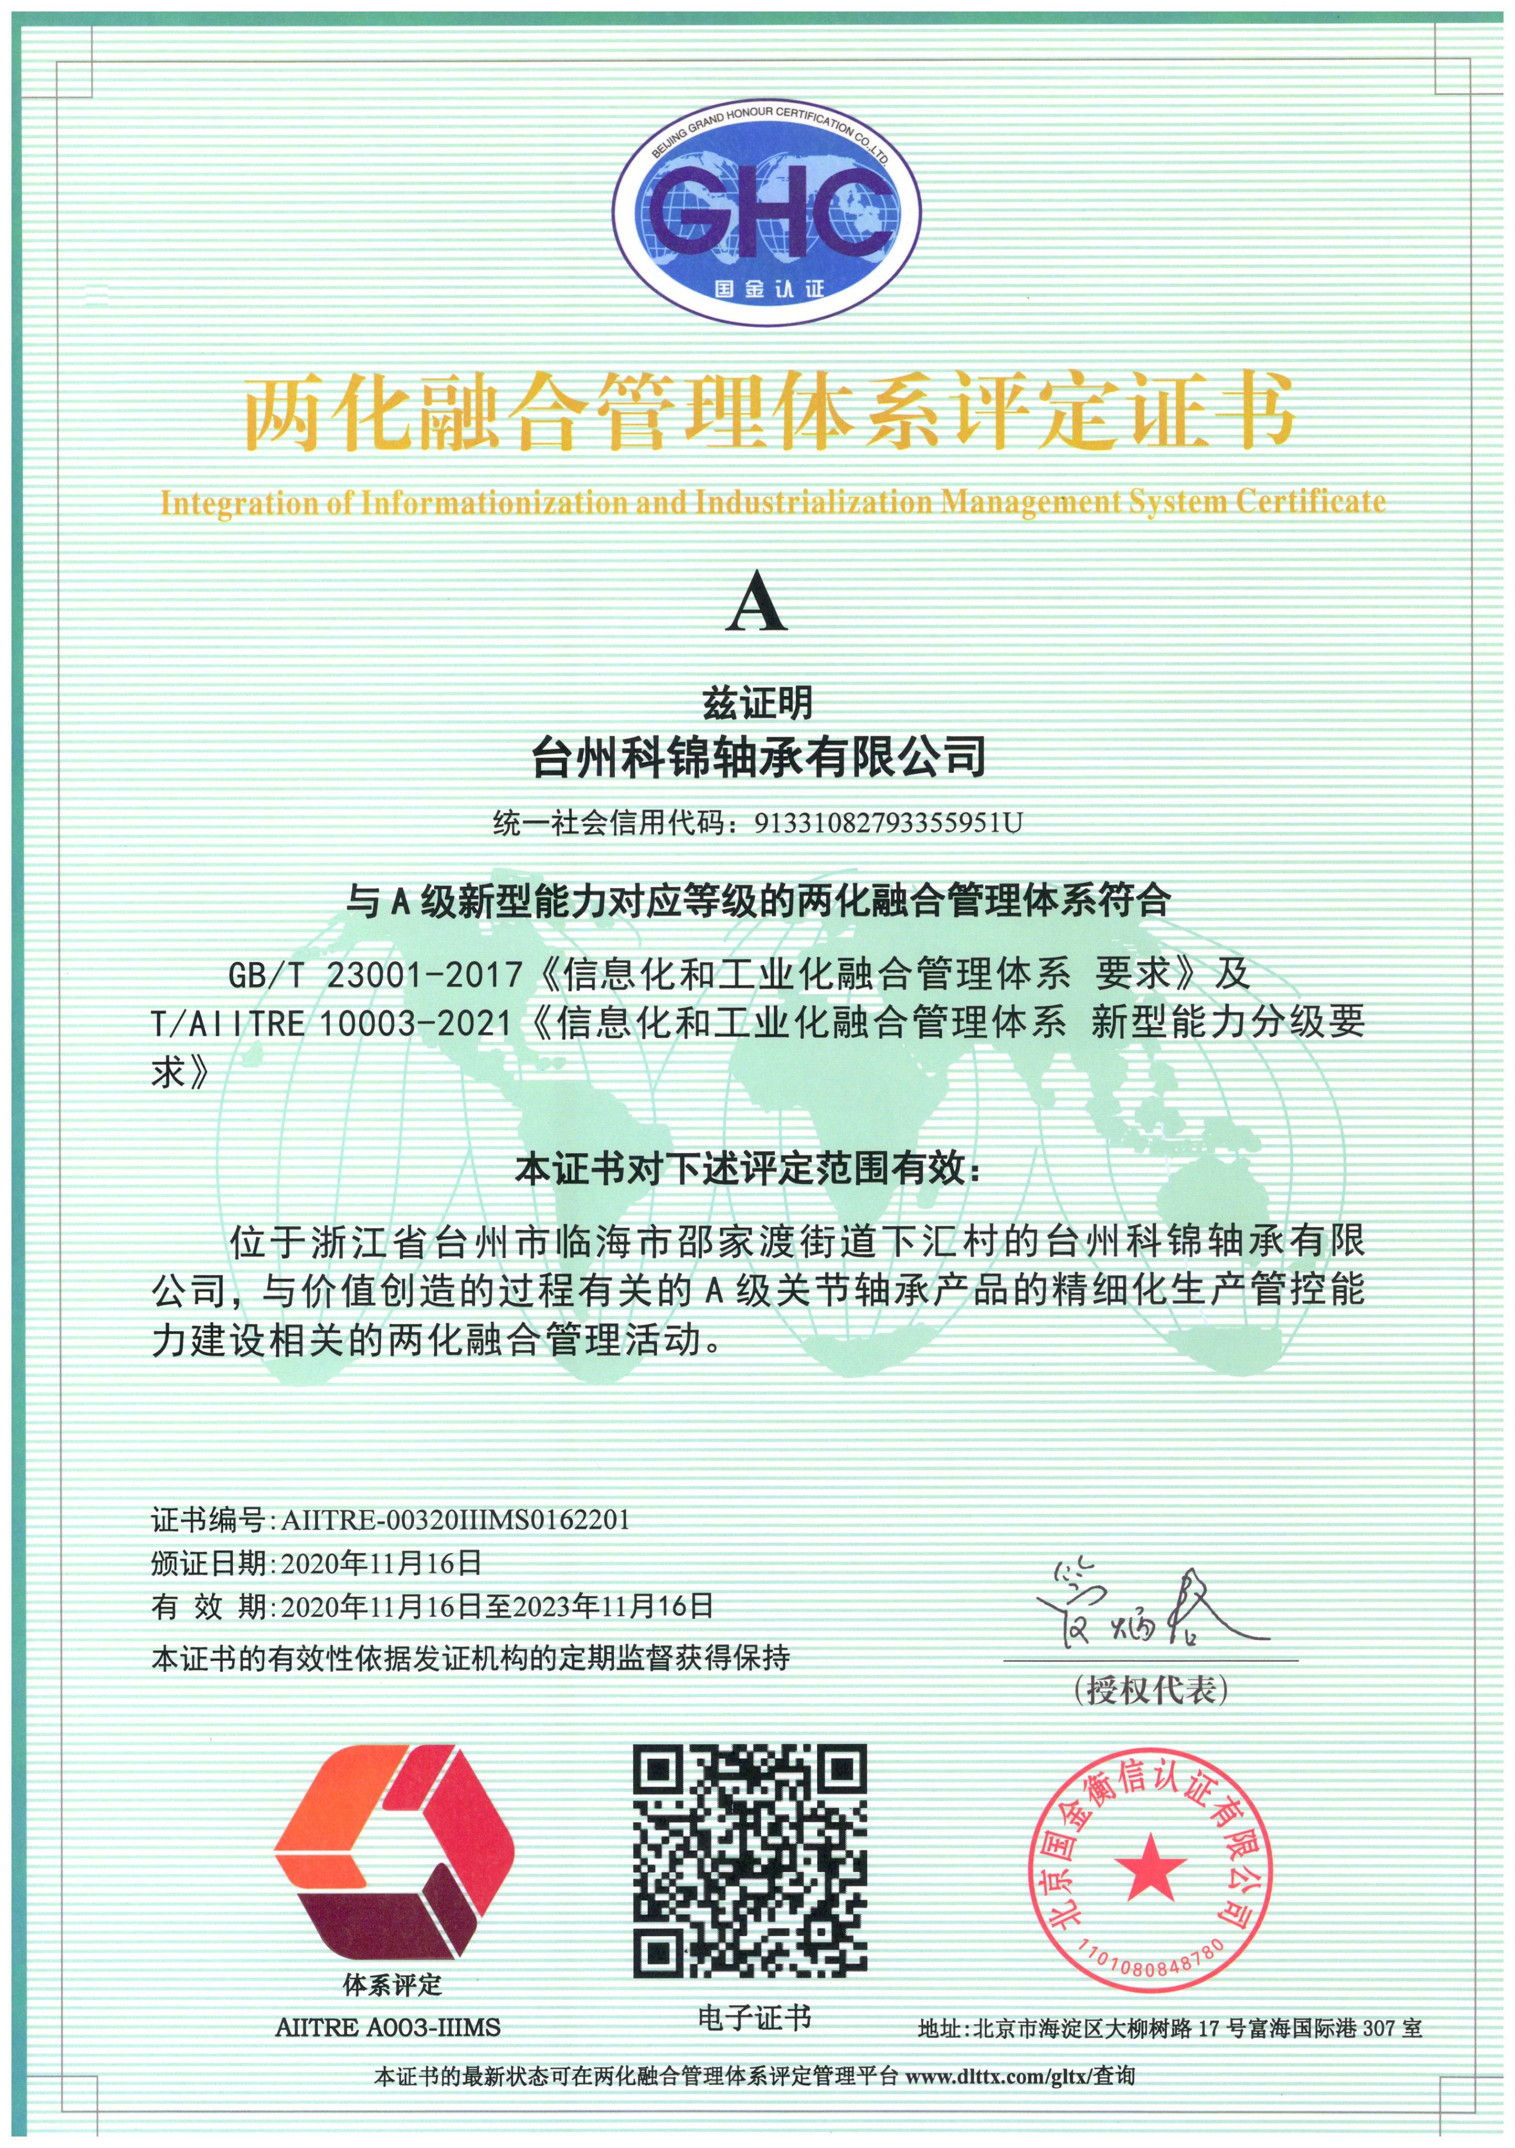 Evaluation certificate of integrated management system of informatization and informatization